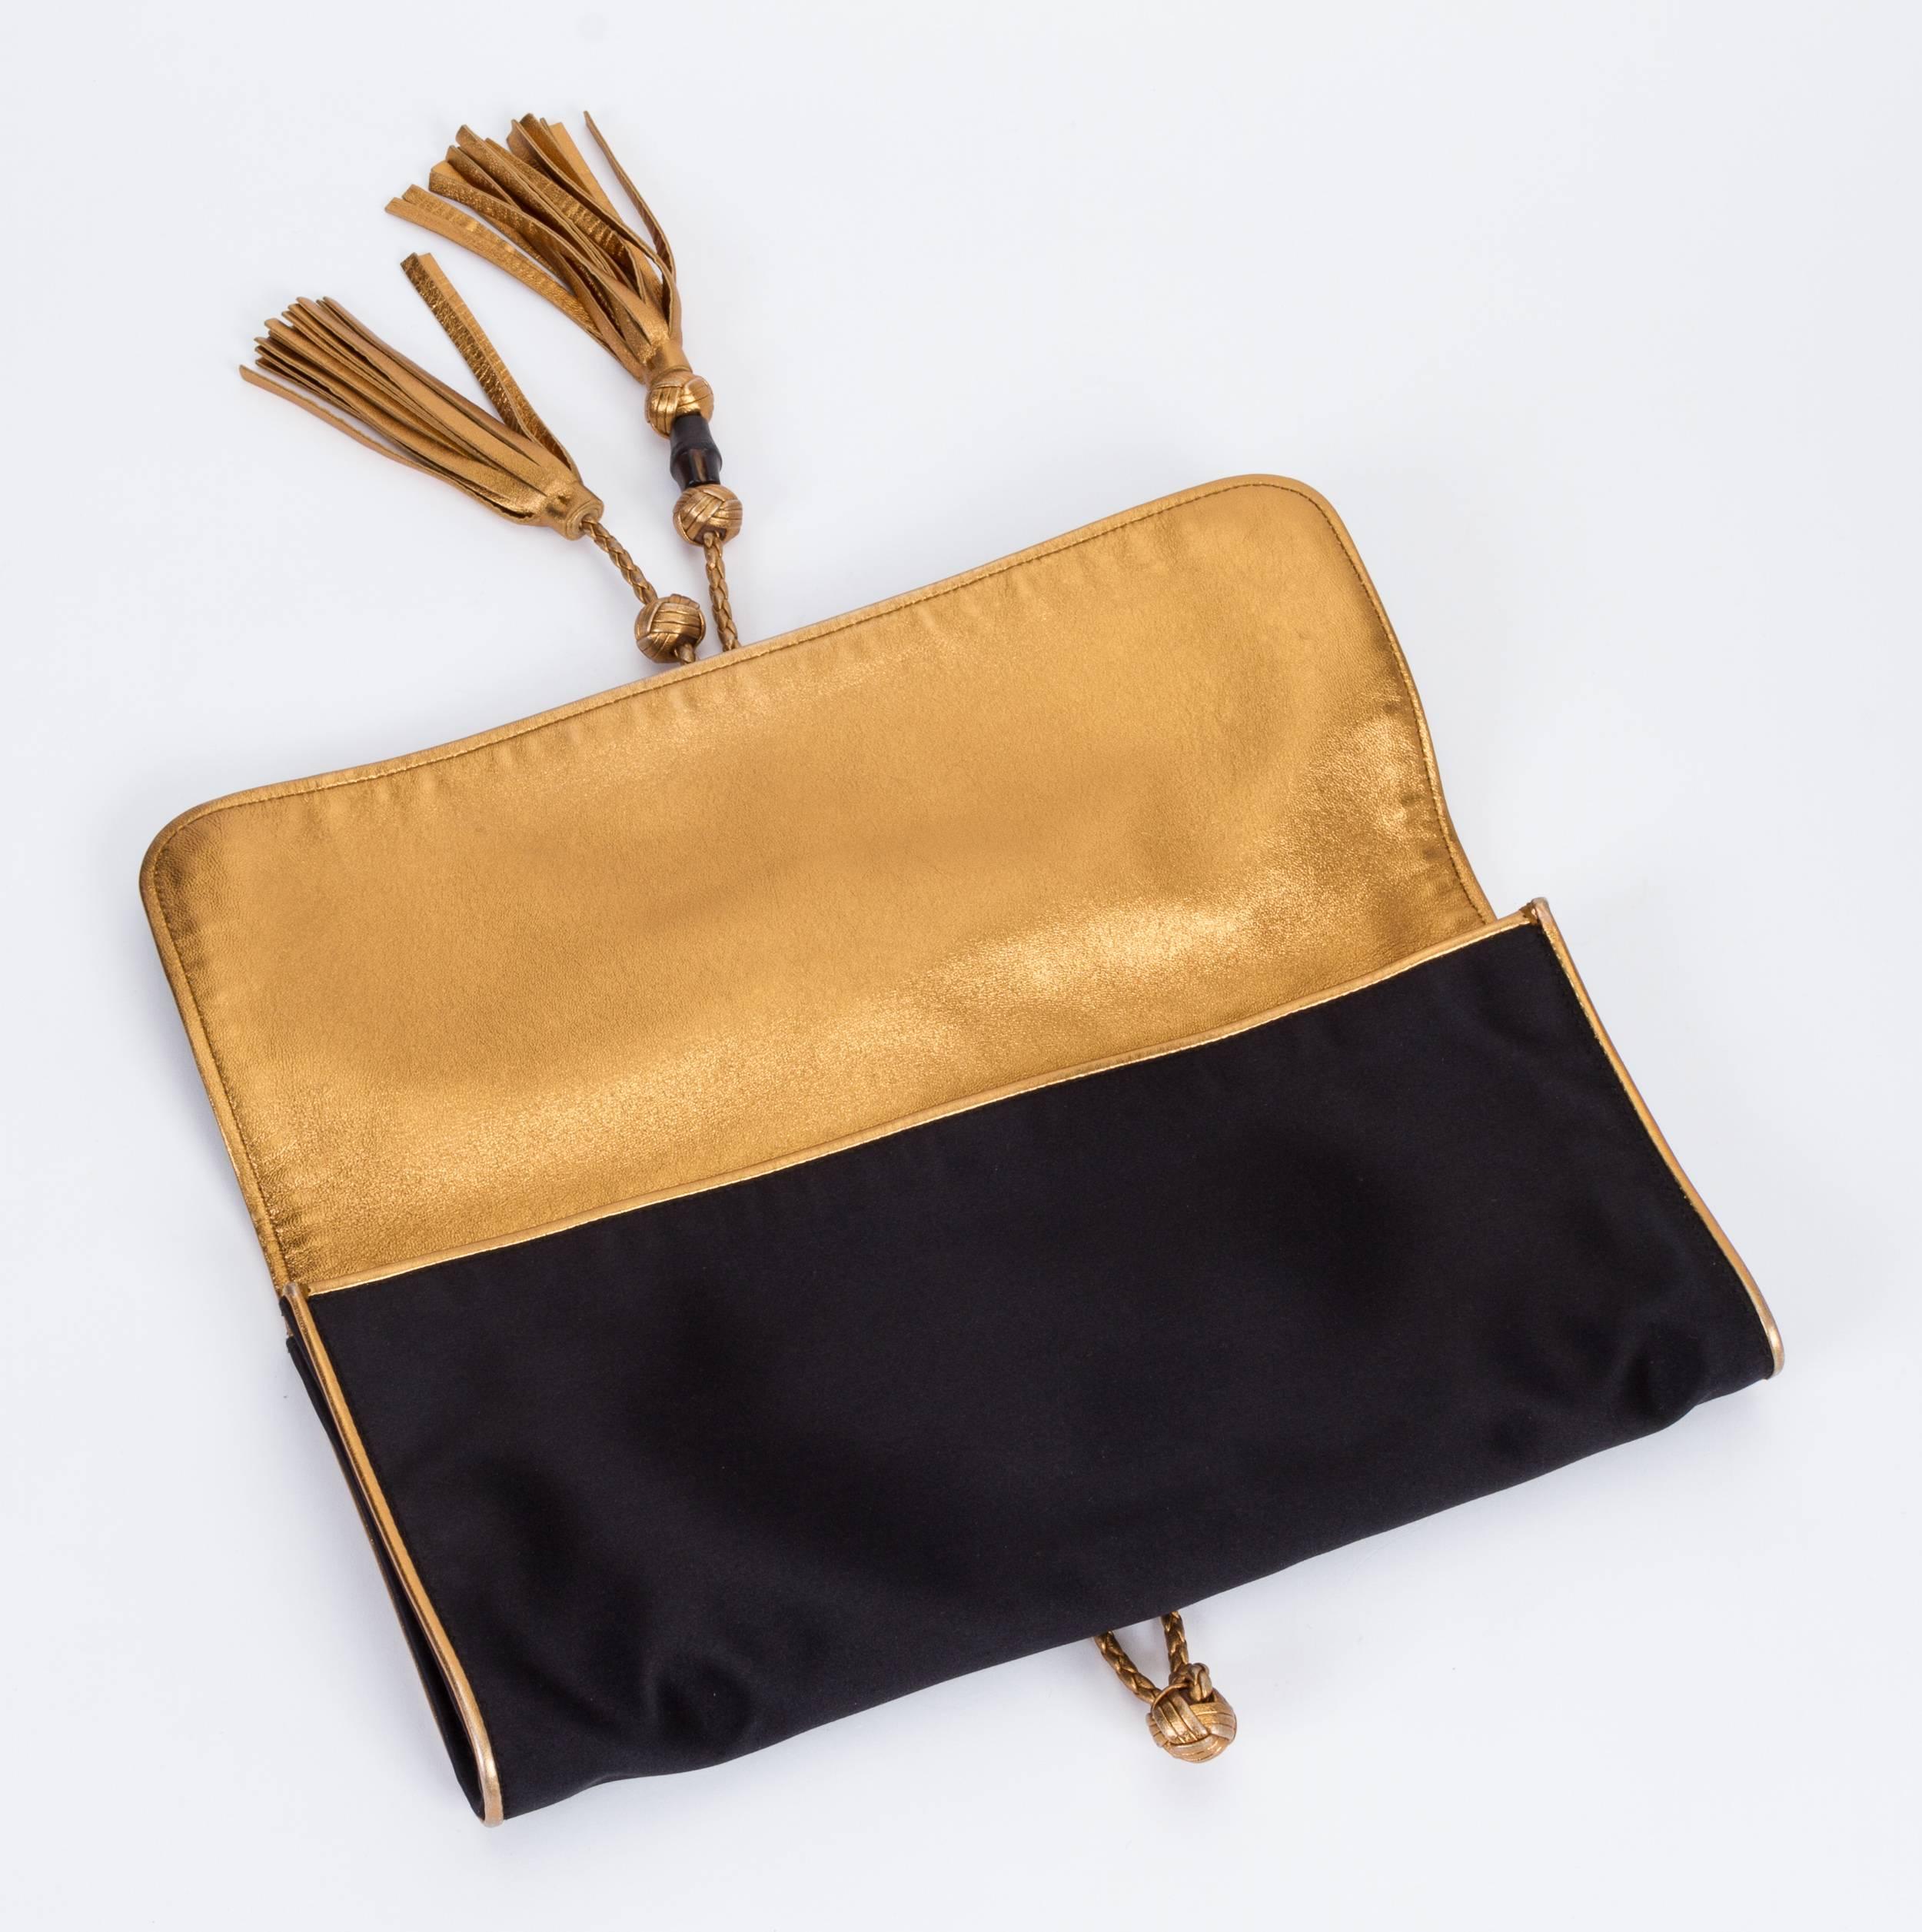 Gucci black silk satin and gold lambskin envelope oversized clutch with fringe tassels. Bamboo detail and Gucci metal logo slide. Excellent condition. Zipped interior . Comes with booklet and original dust cover.